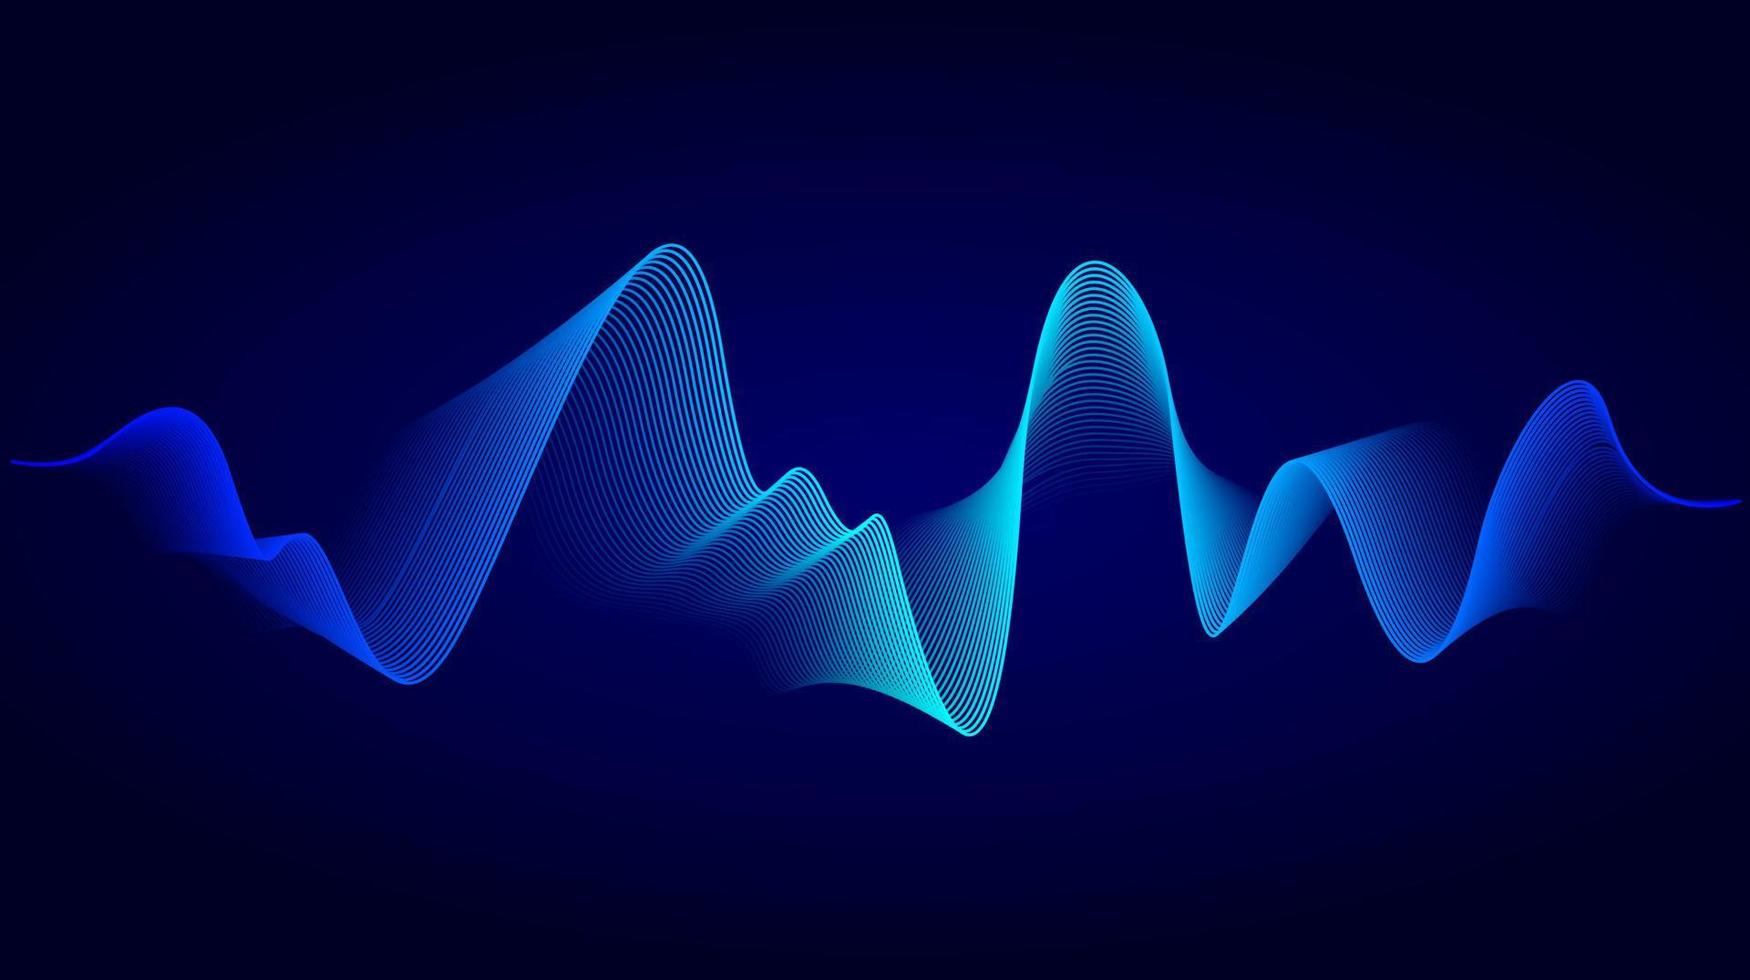 Blue dynamic flowing line light design. Abstract sound wave background. Vector illustration of music, technology concept